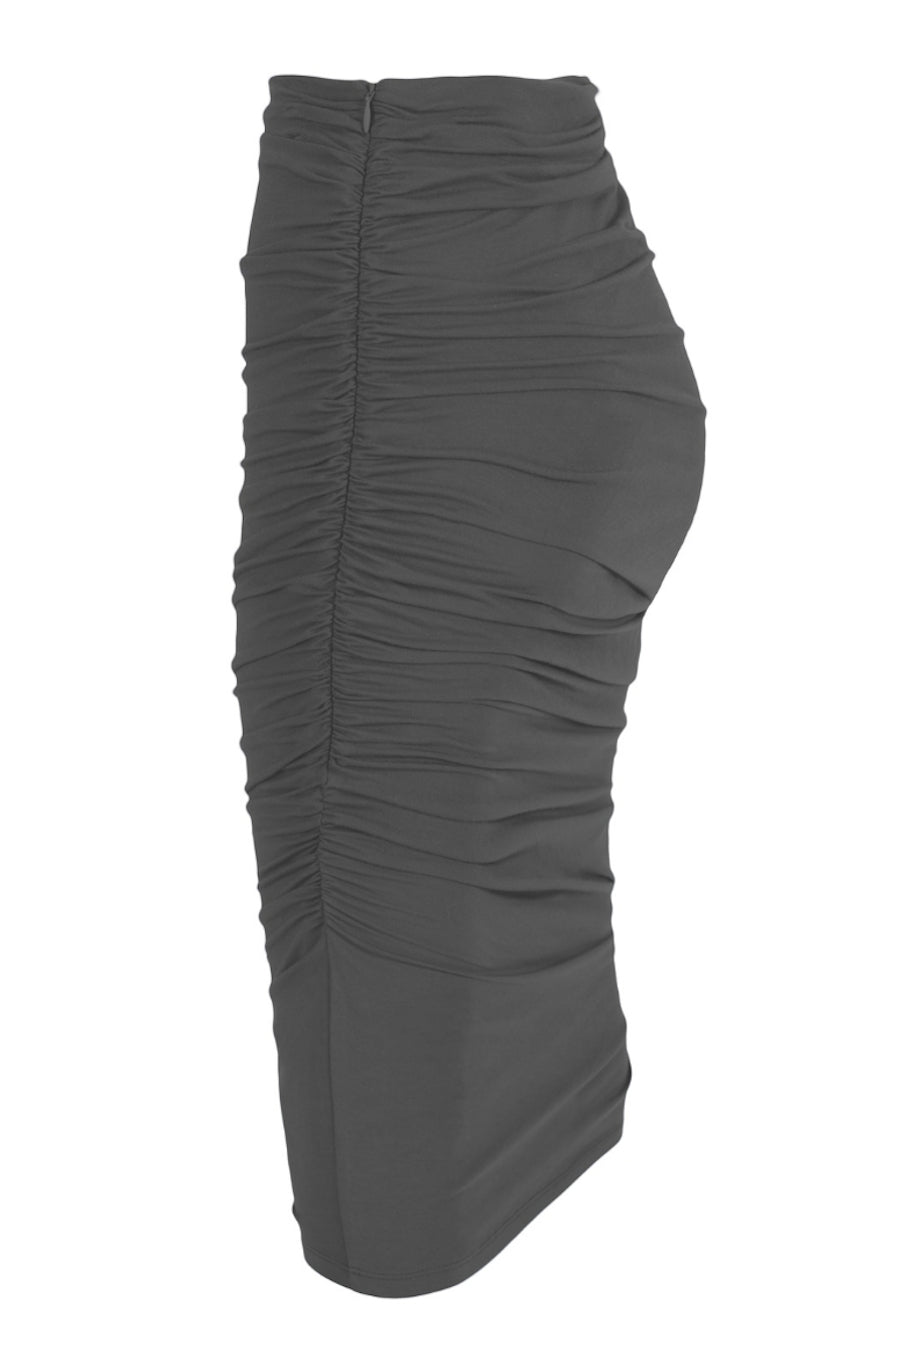 Shapewear Skirts - Meet the Embodycon™ Bamboo Shaping Skirt - Charcoal –  Contour Clothing